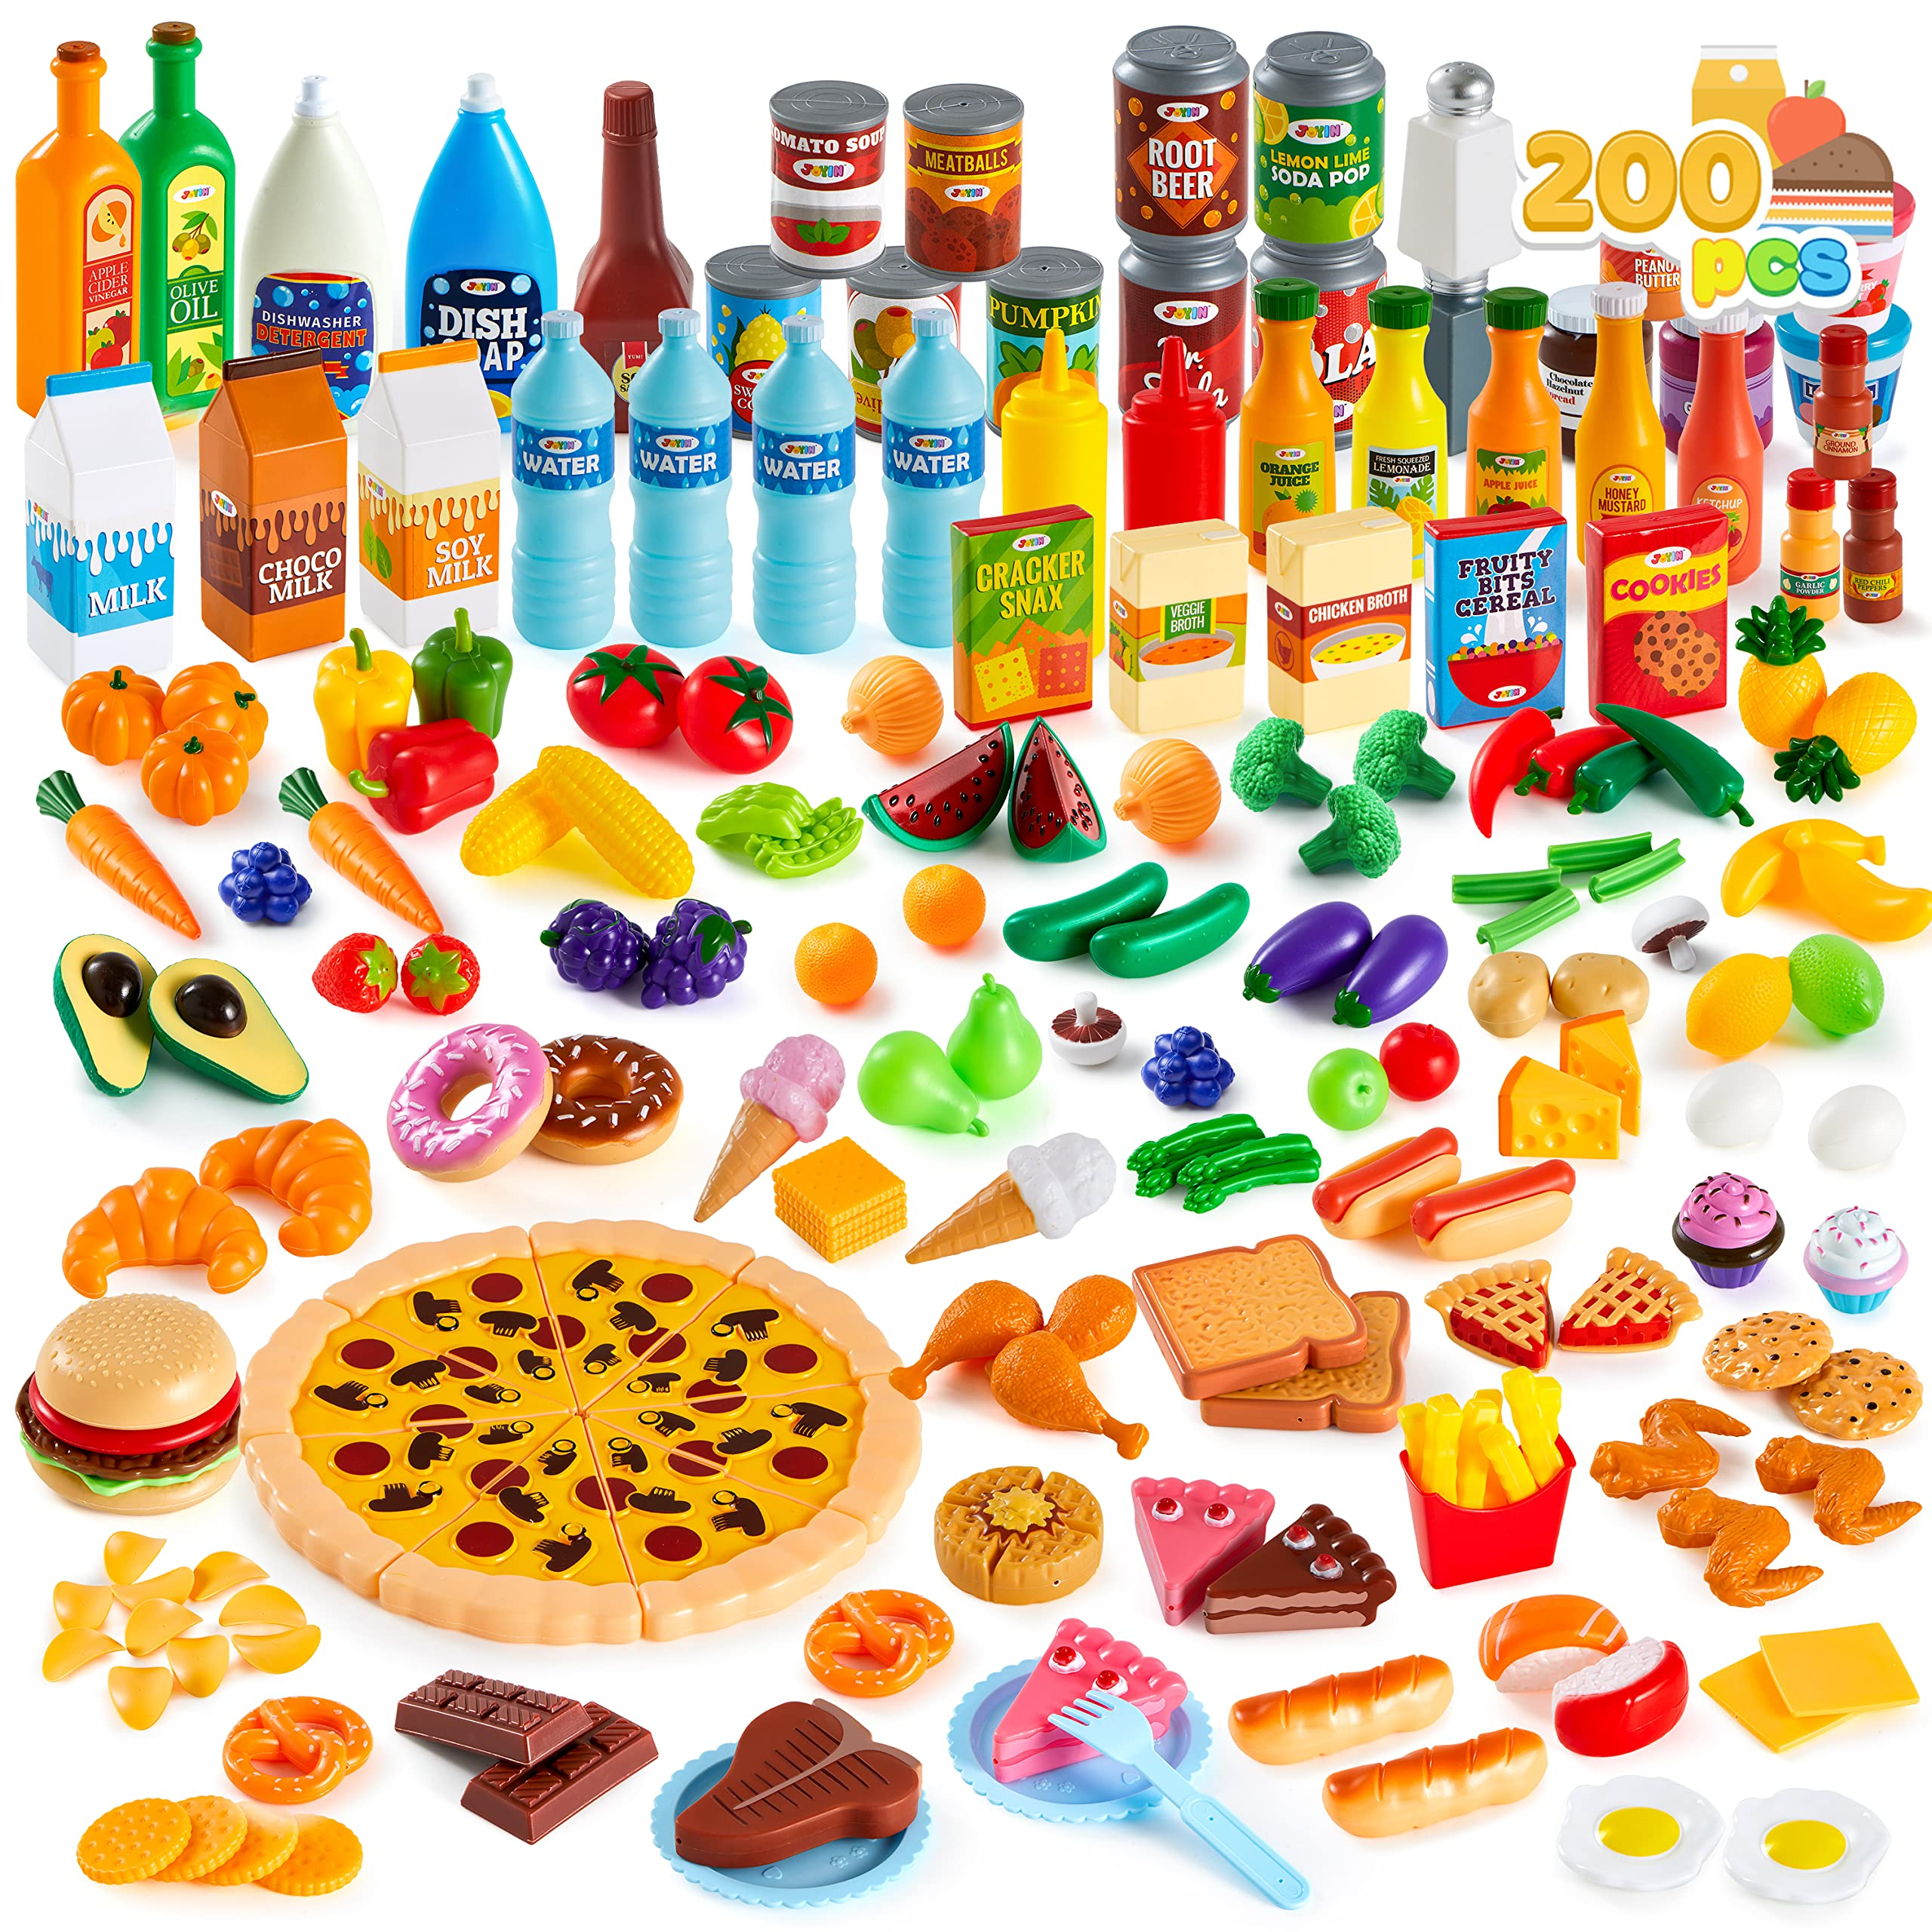 JOYIN 135 Pieces Kids Play Food Set, Value Pretend Food for Play Kitchen with Fruit, Vegetable, Food Can, Dessert, Tableware, Bottles, Dramatic